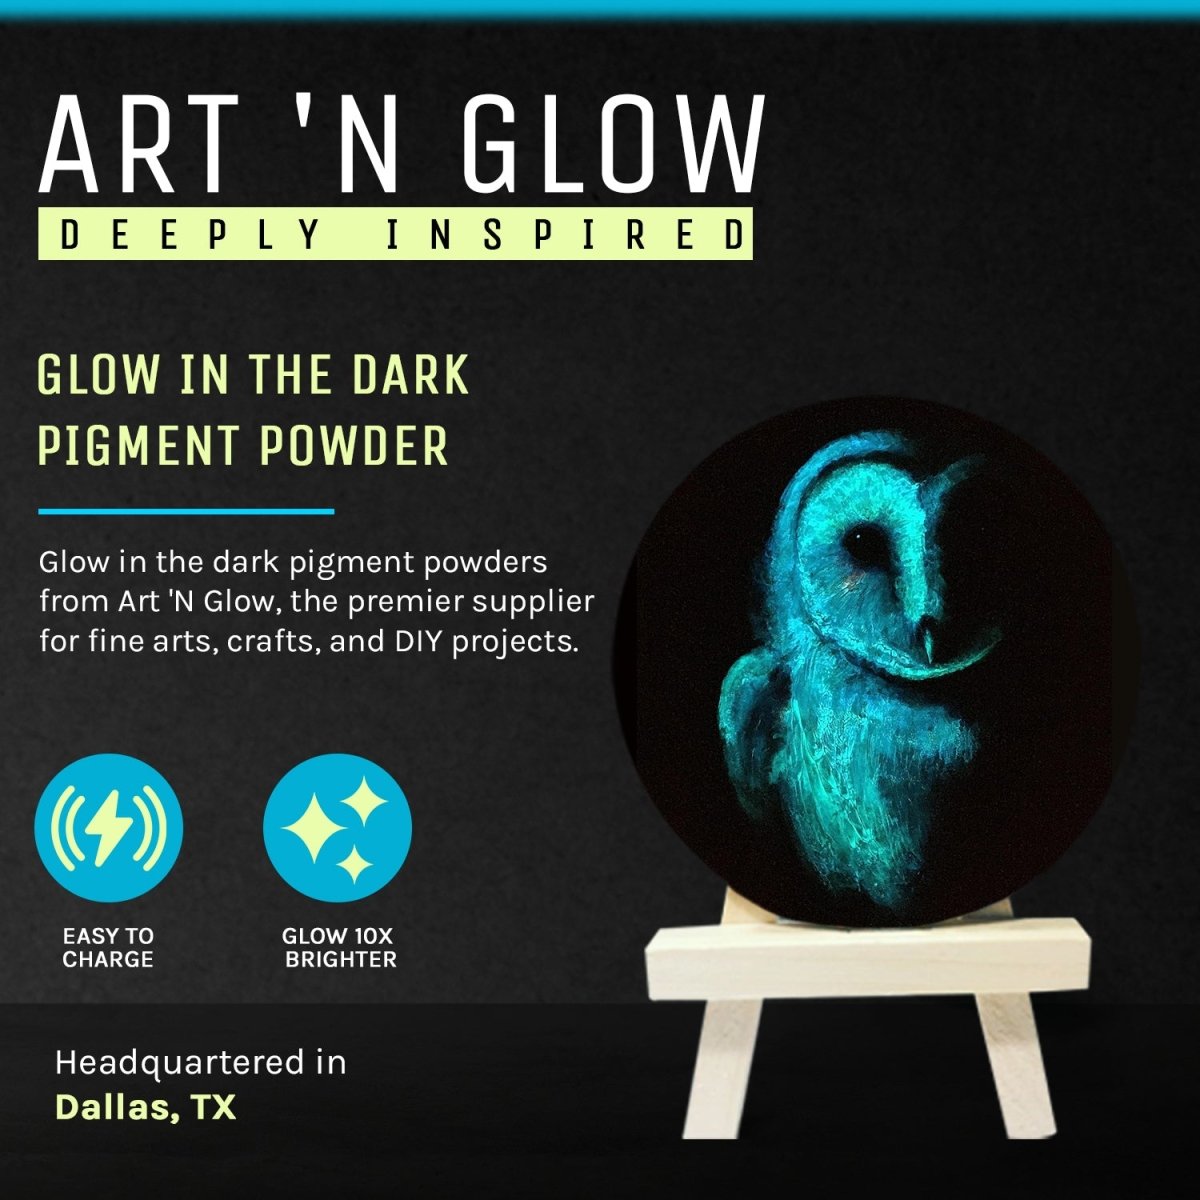 art 'n glow's brightest and easiest to charge glow powder